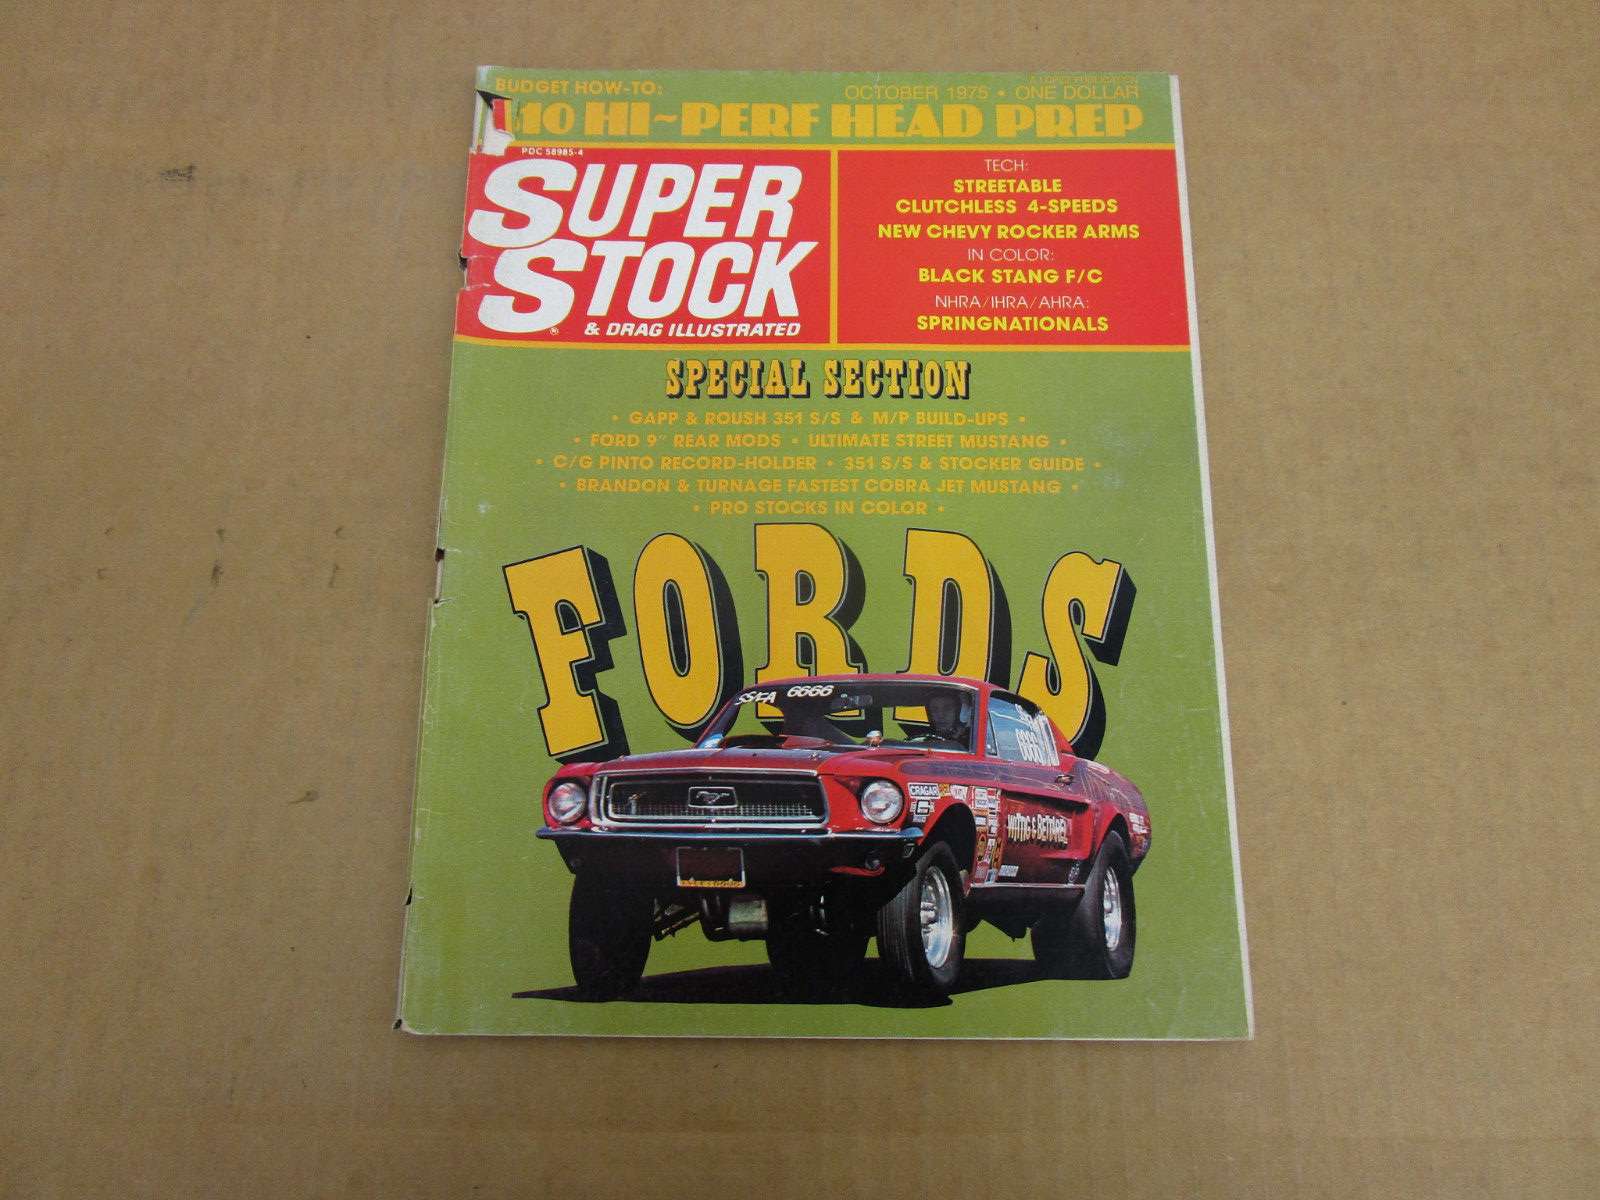 SUPER STOCK & DRAG ILL magazine October 1975 Ford Chevrolet Mustang race racing